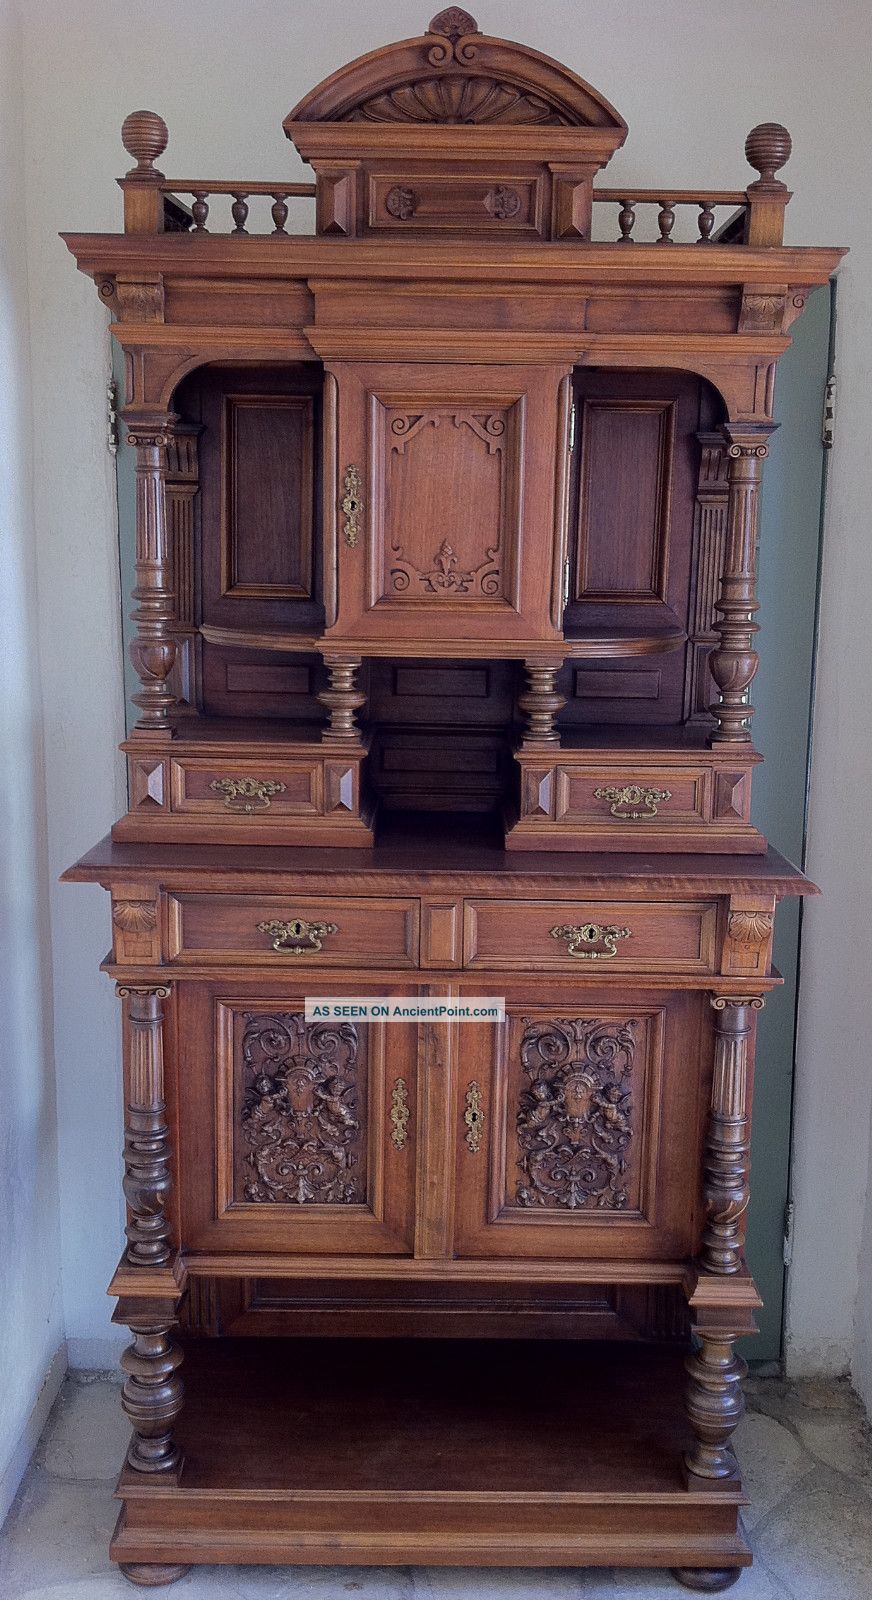 Antique Hutch With Elegant Carvings And Details 1900-1950 photo